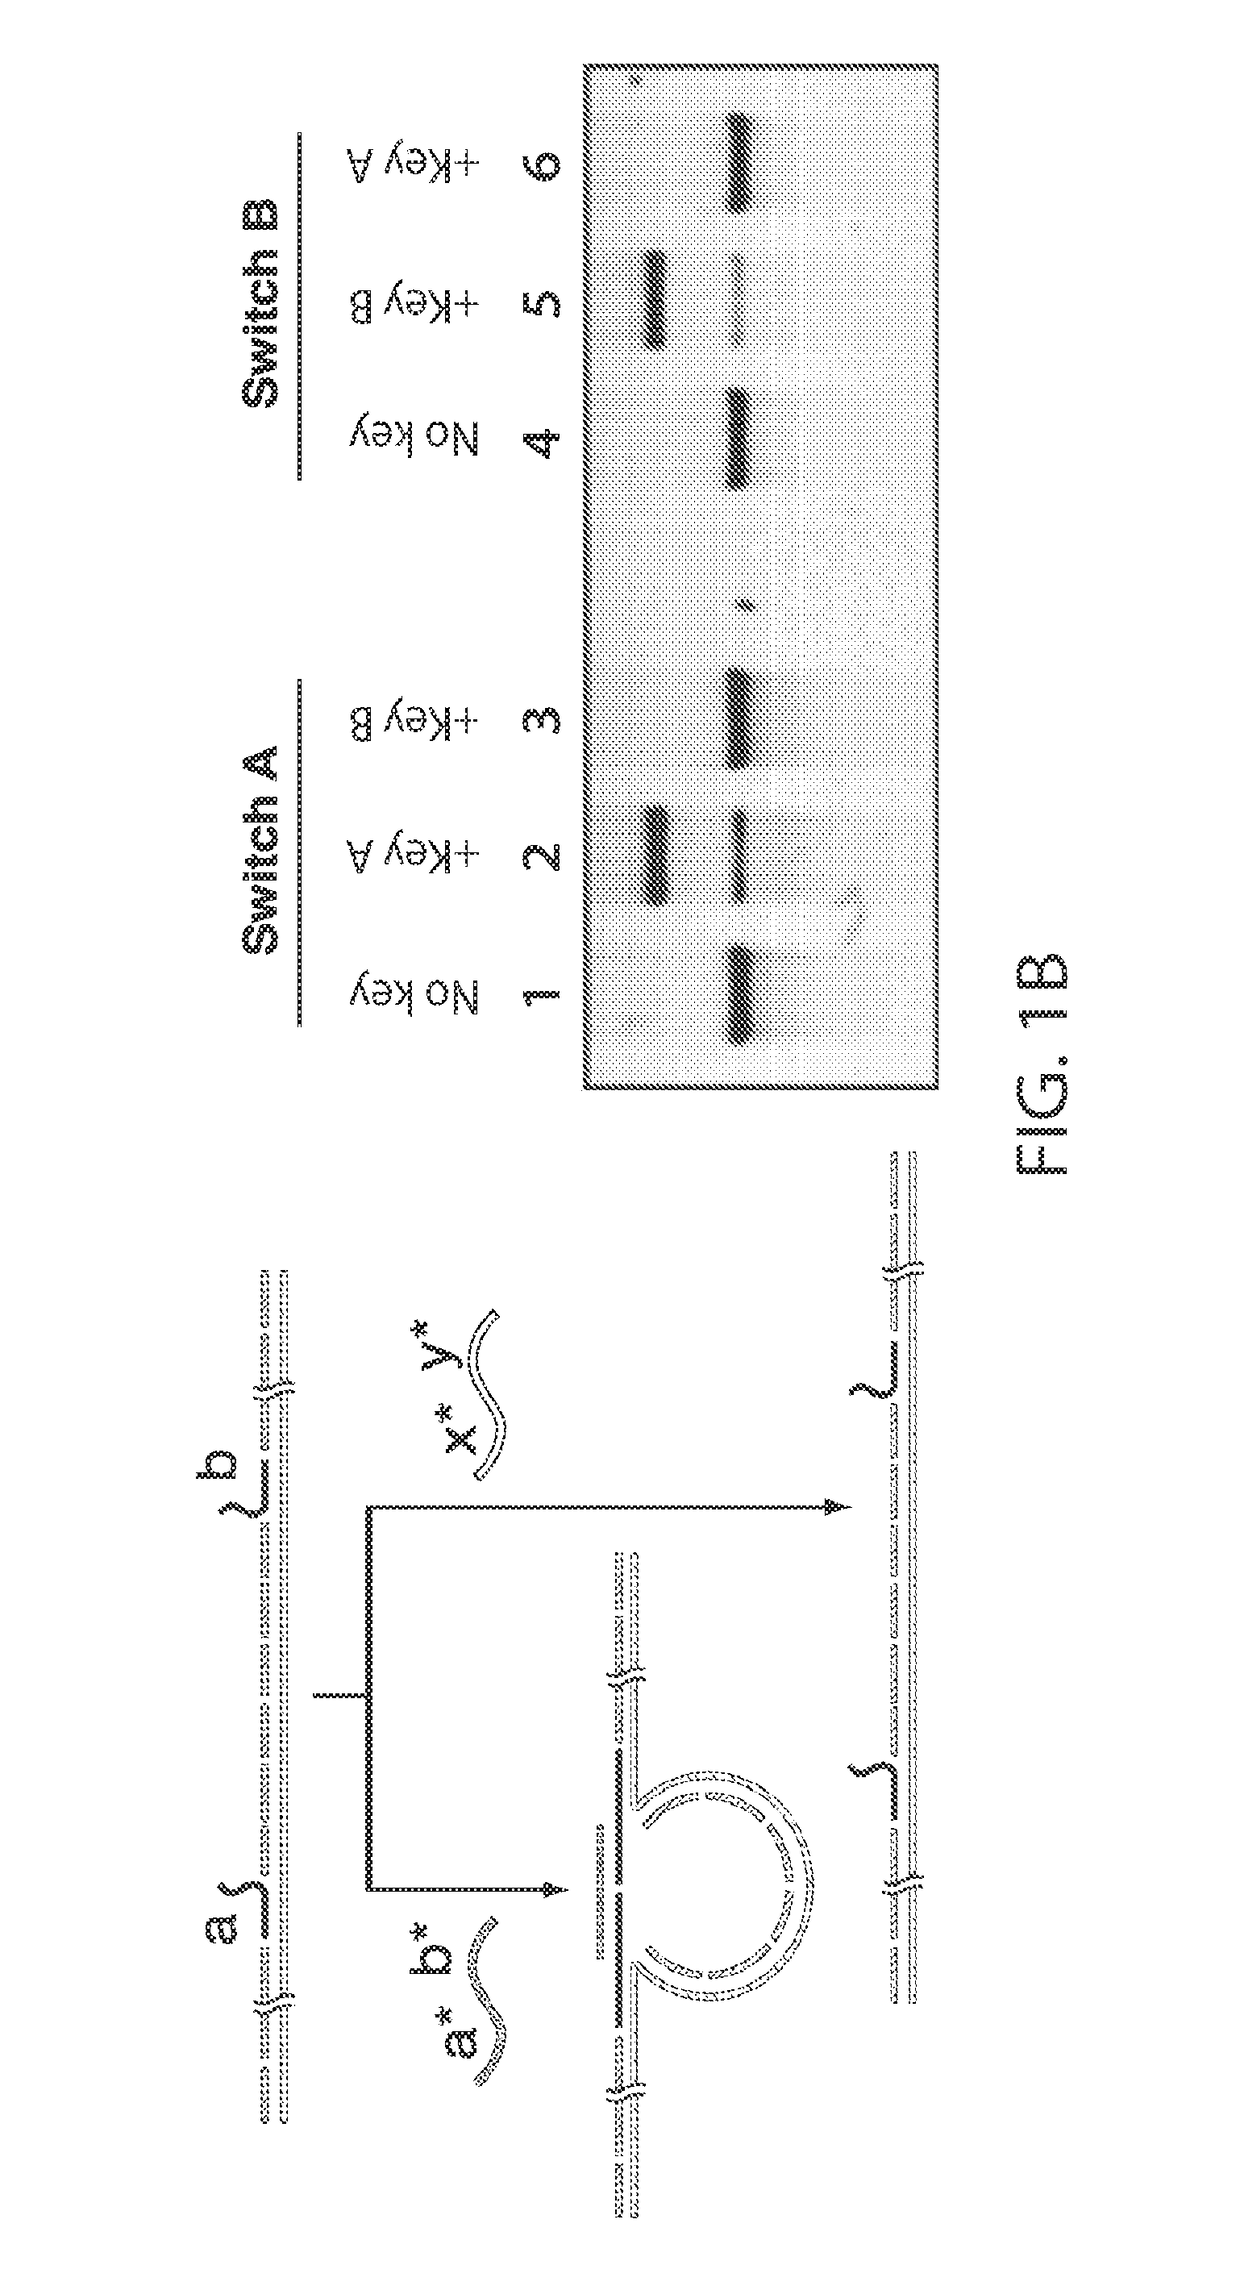 Compositions and methods for analyte detection using nanoswitches